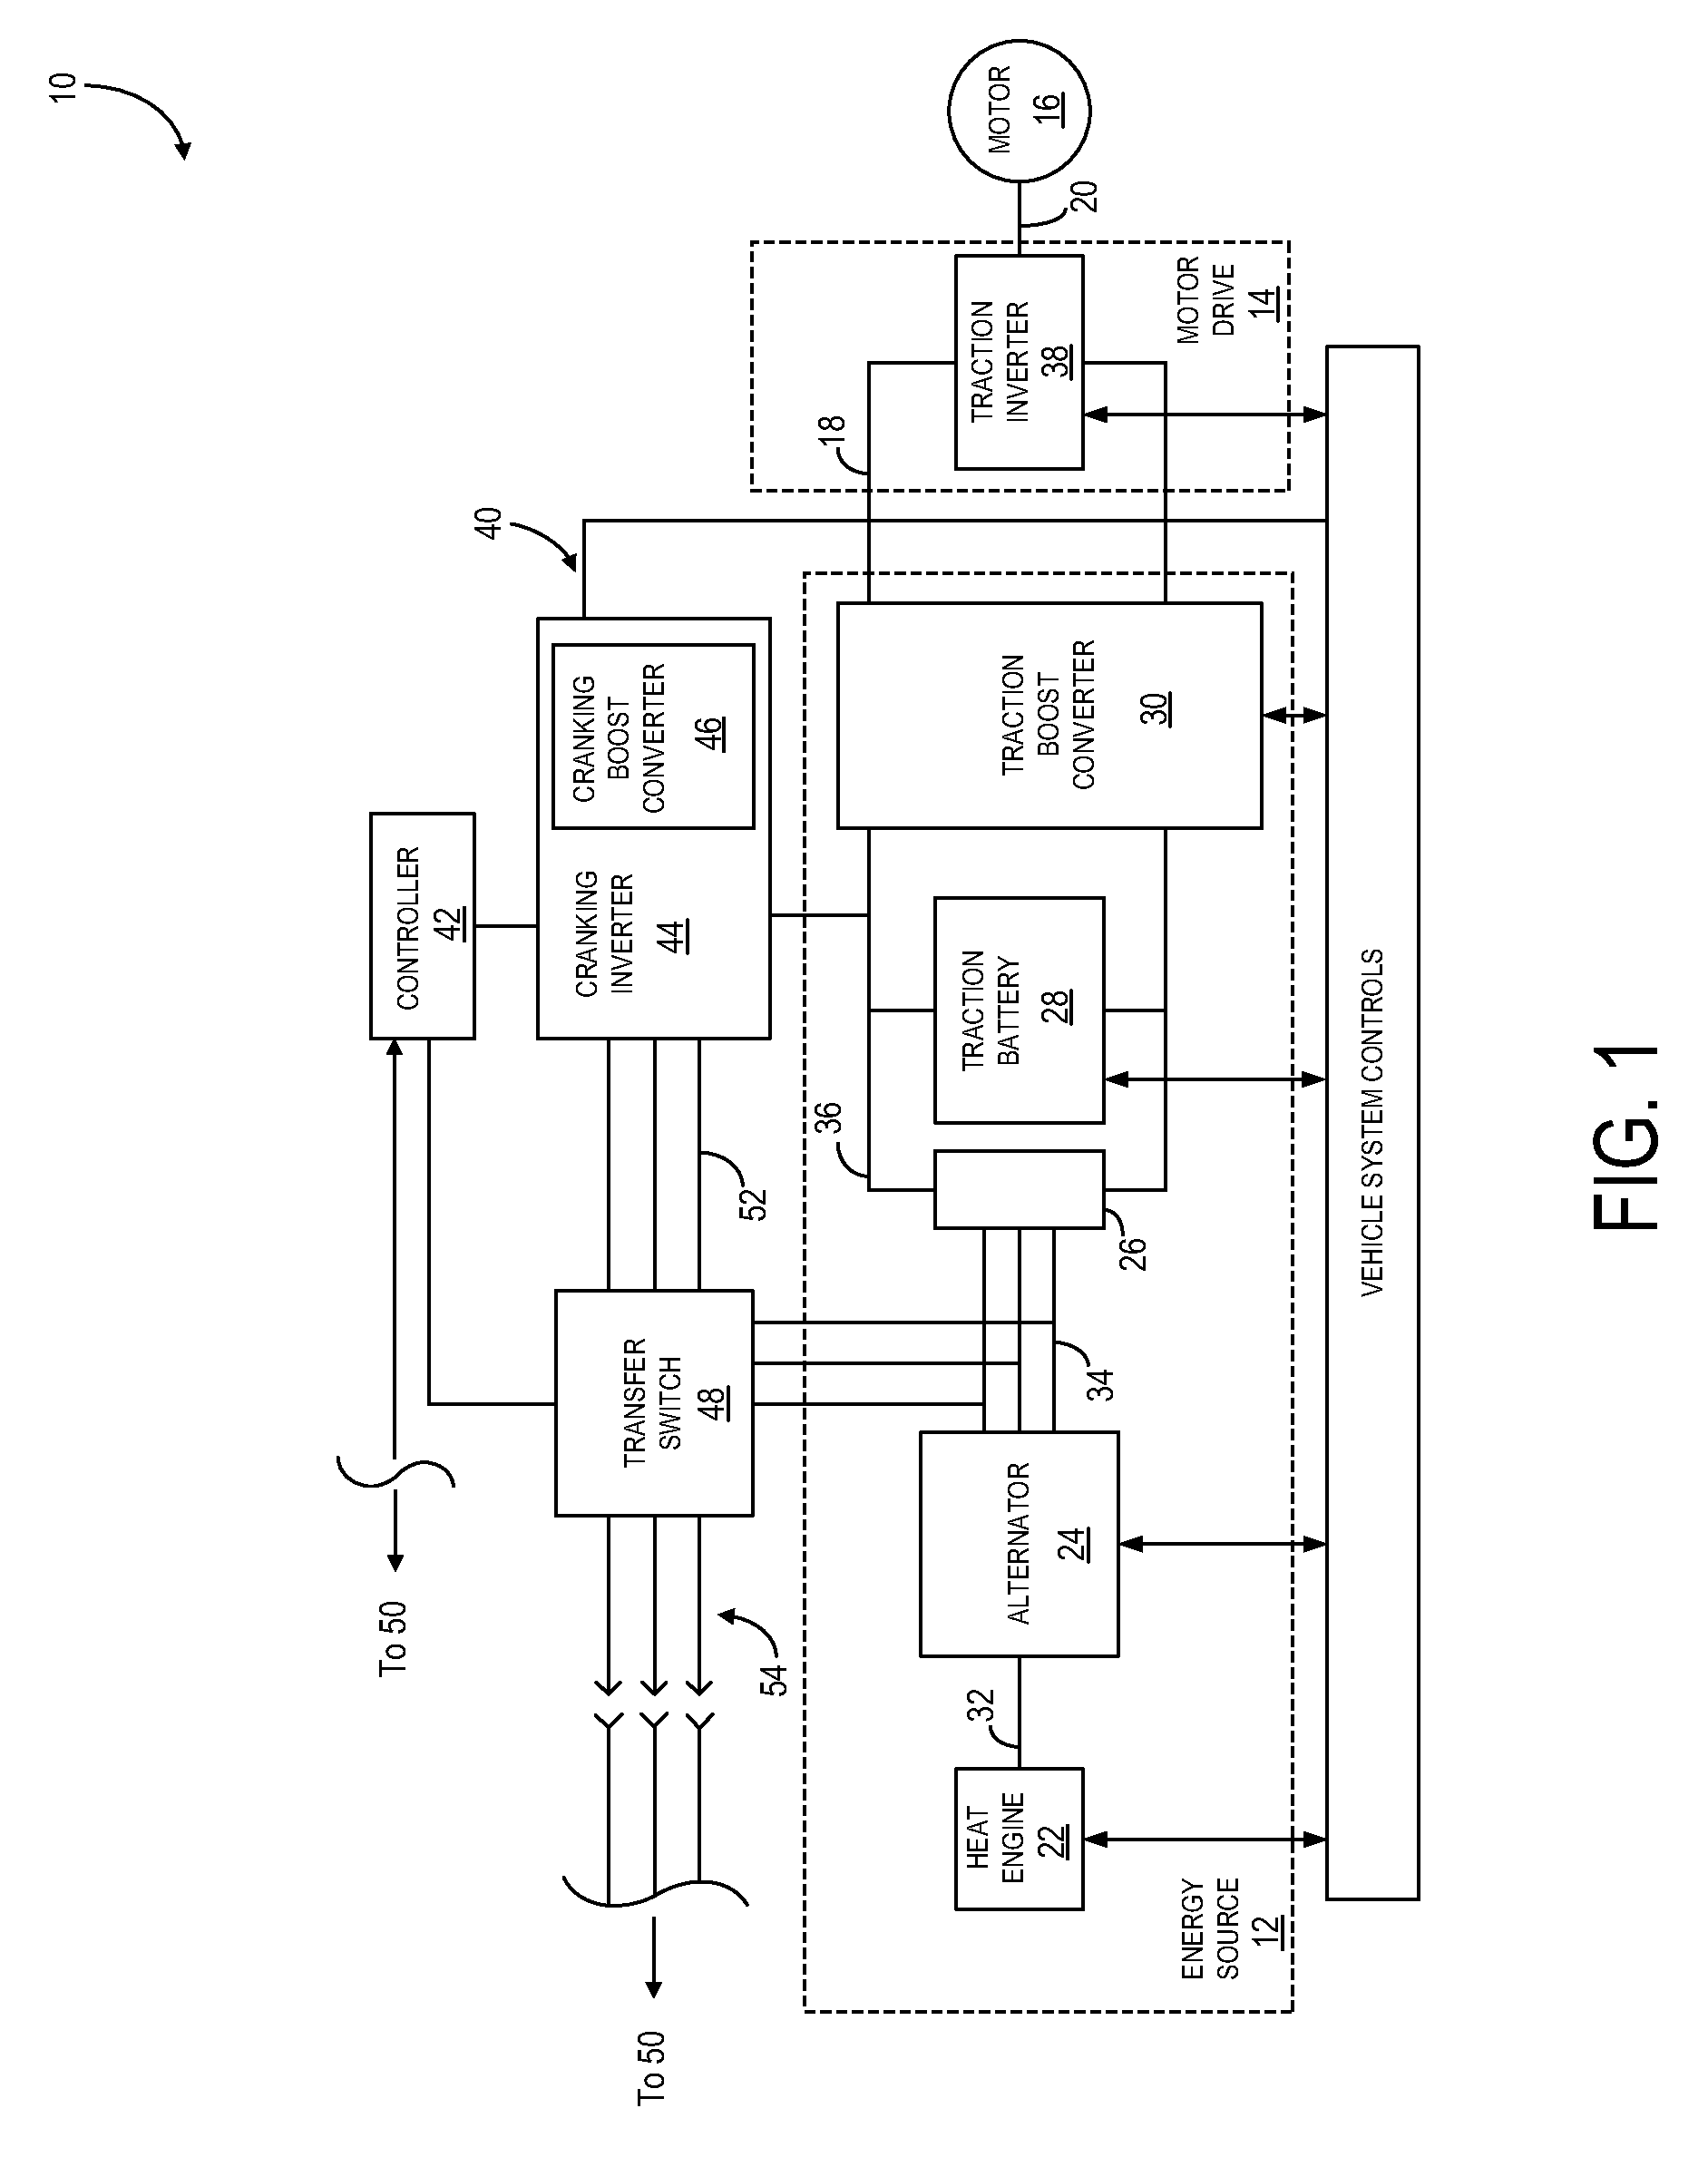 Method and apparatus for producing tractive effort with interface to other apparatus